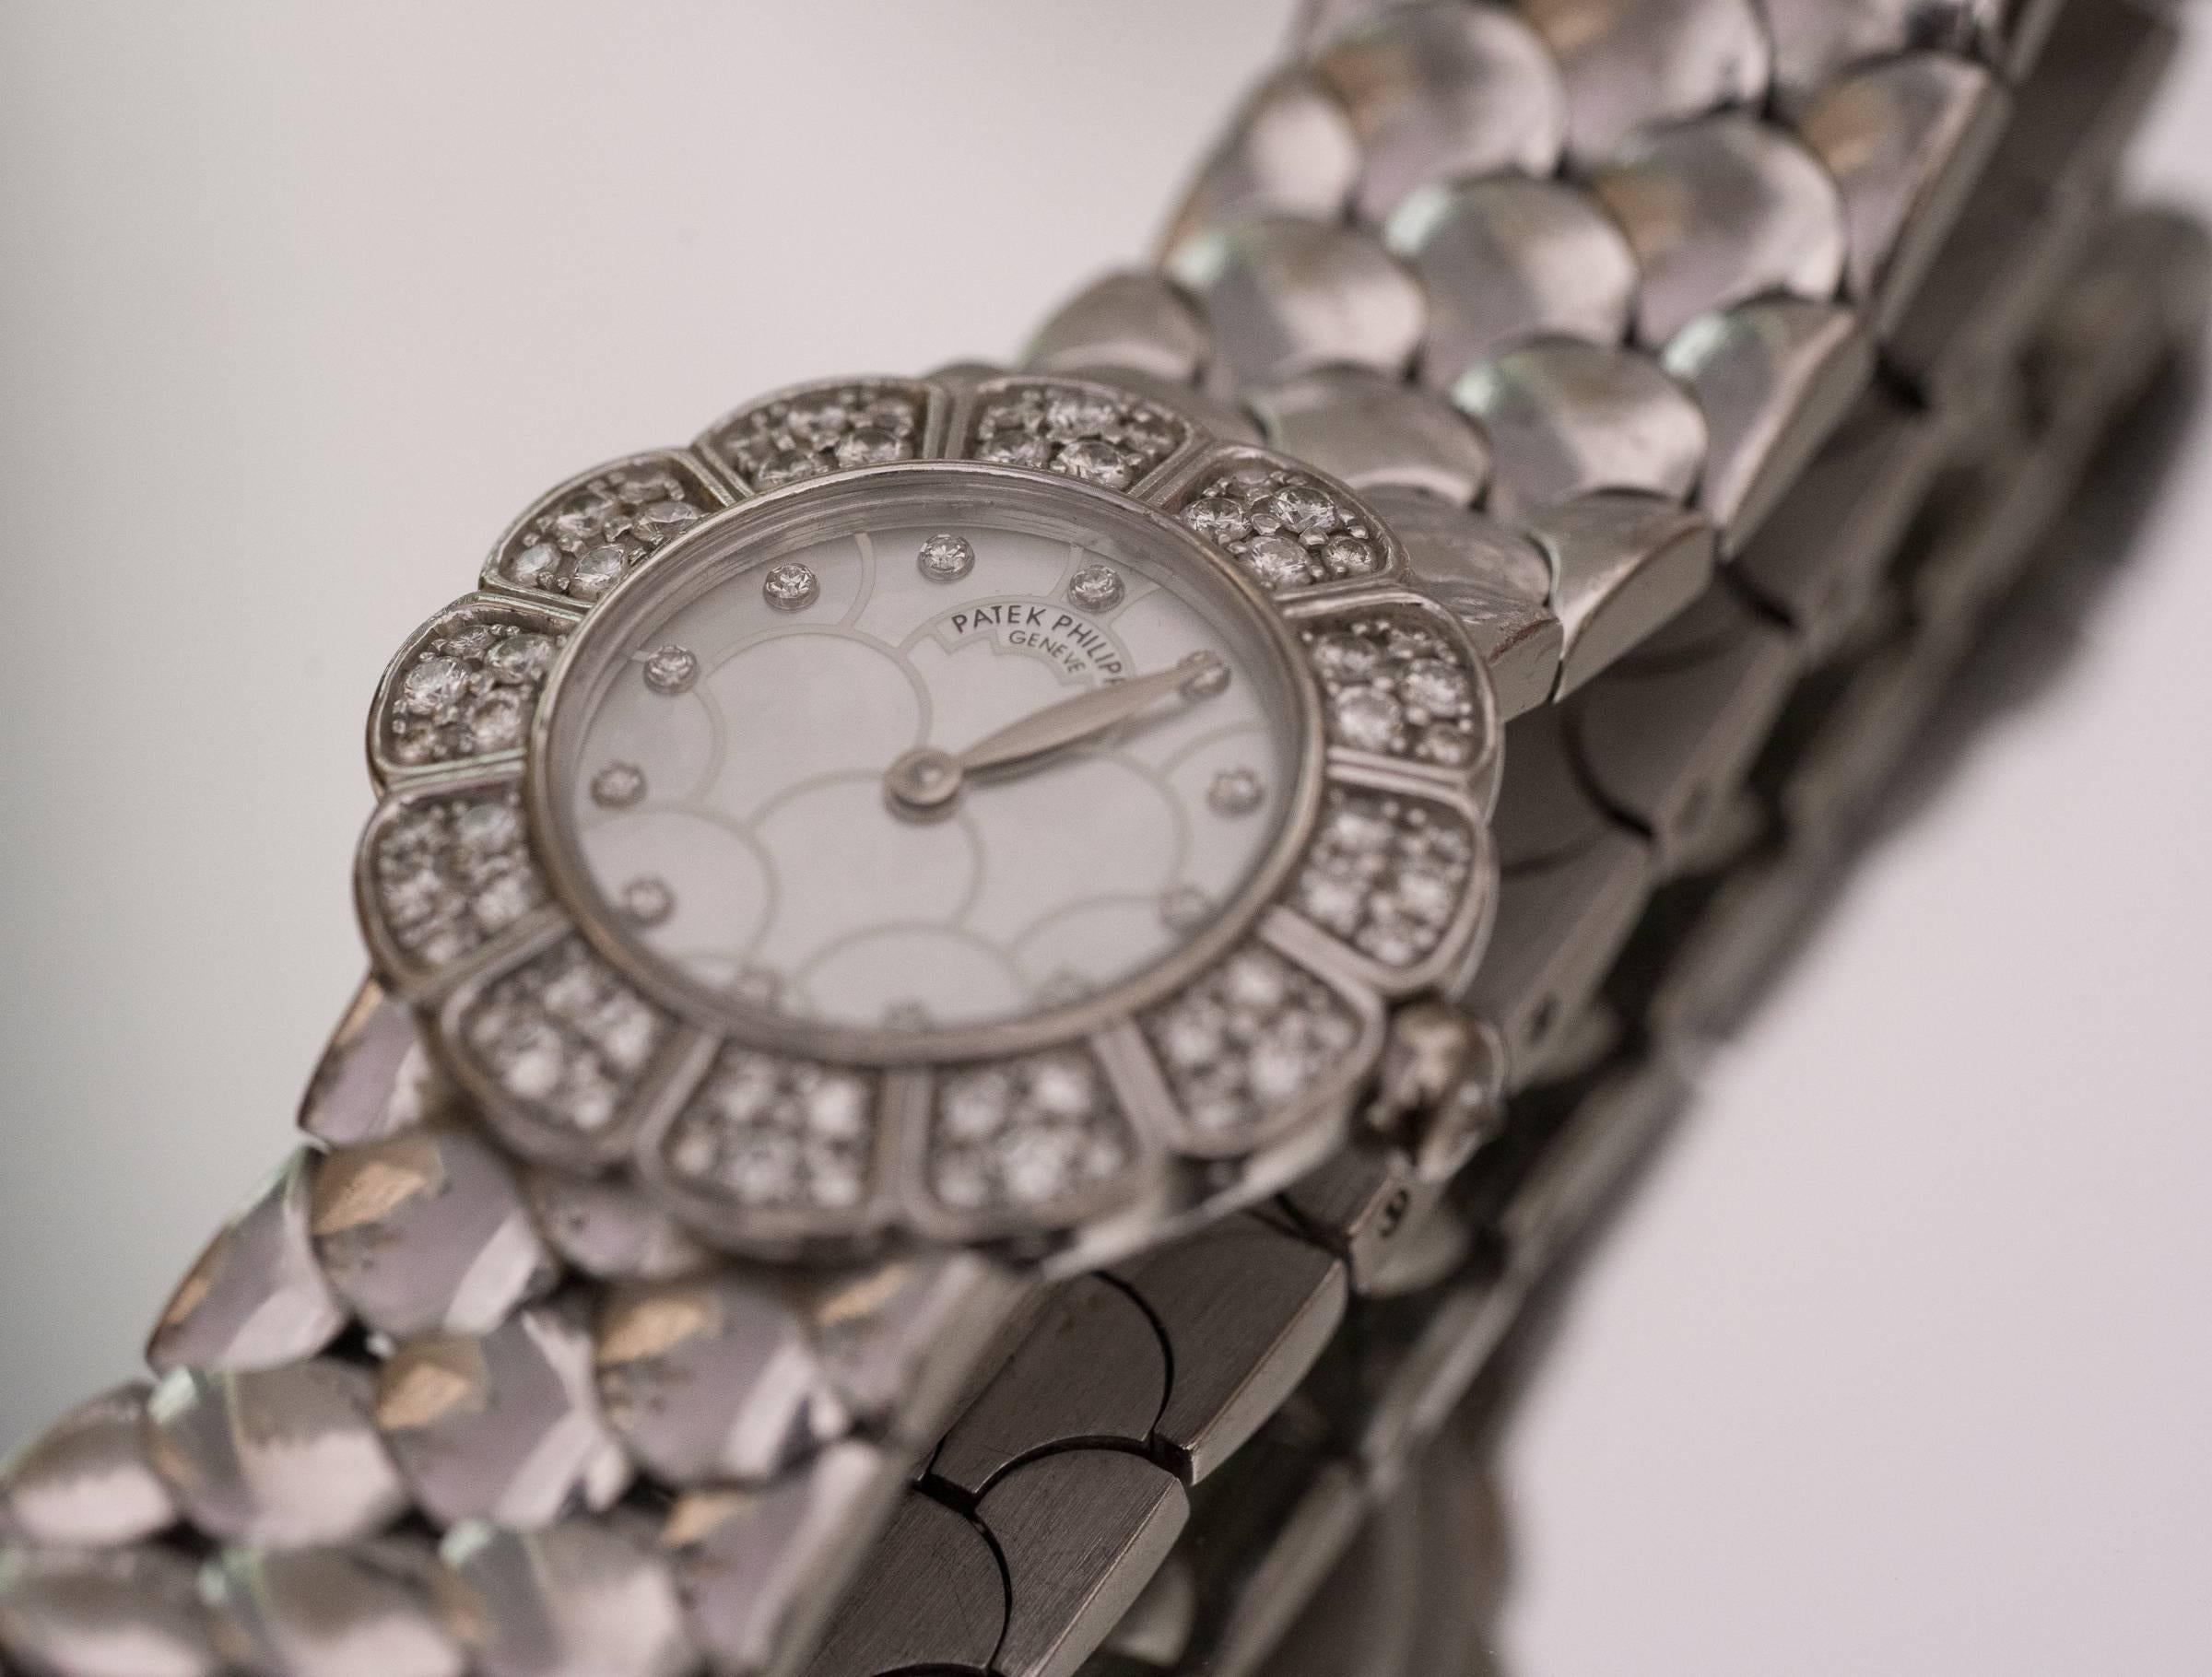 Patek Philipe Crafted in 18 Karat White Gold Women's Wrist Watch
Features a Mother of Pearl Dial
Fits a 7.45 inch wrist
Quartz Movement with a brand new battery
Bracelet resembles a fish-scale pattern, very unique!
Factory Diamond Dial,